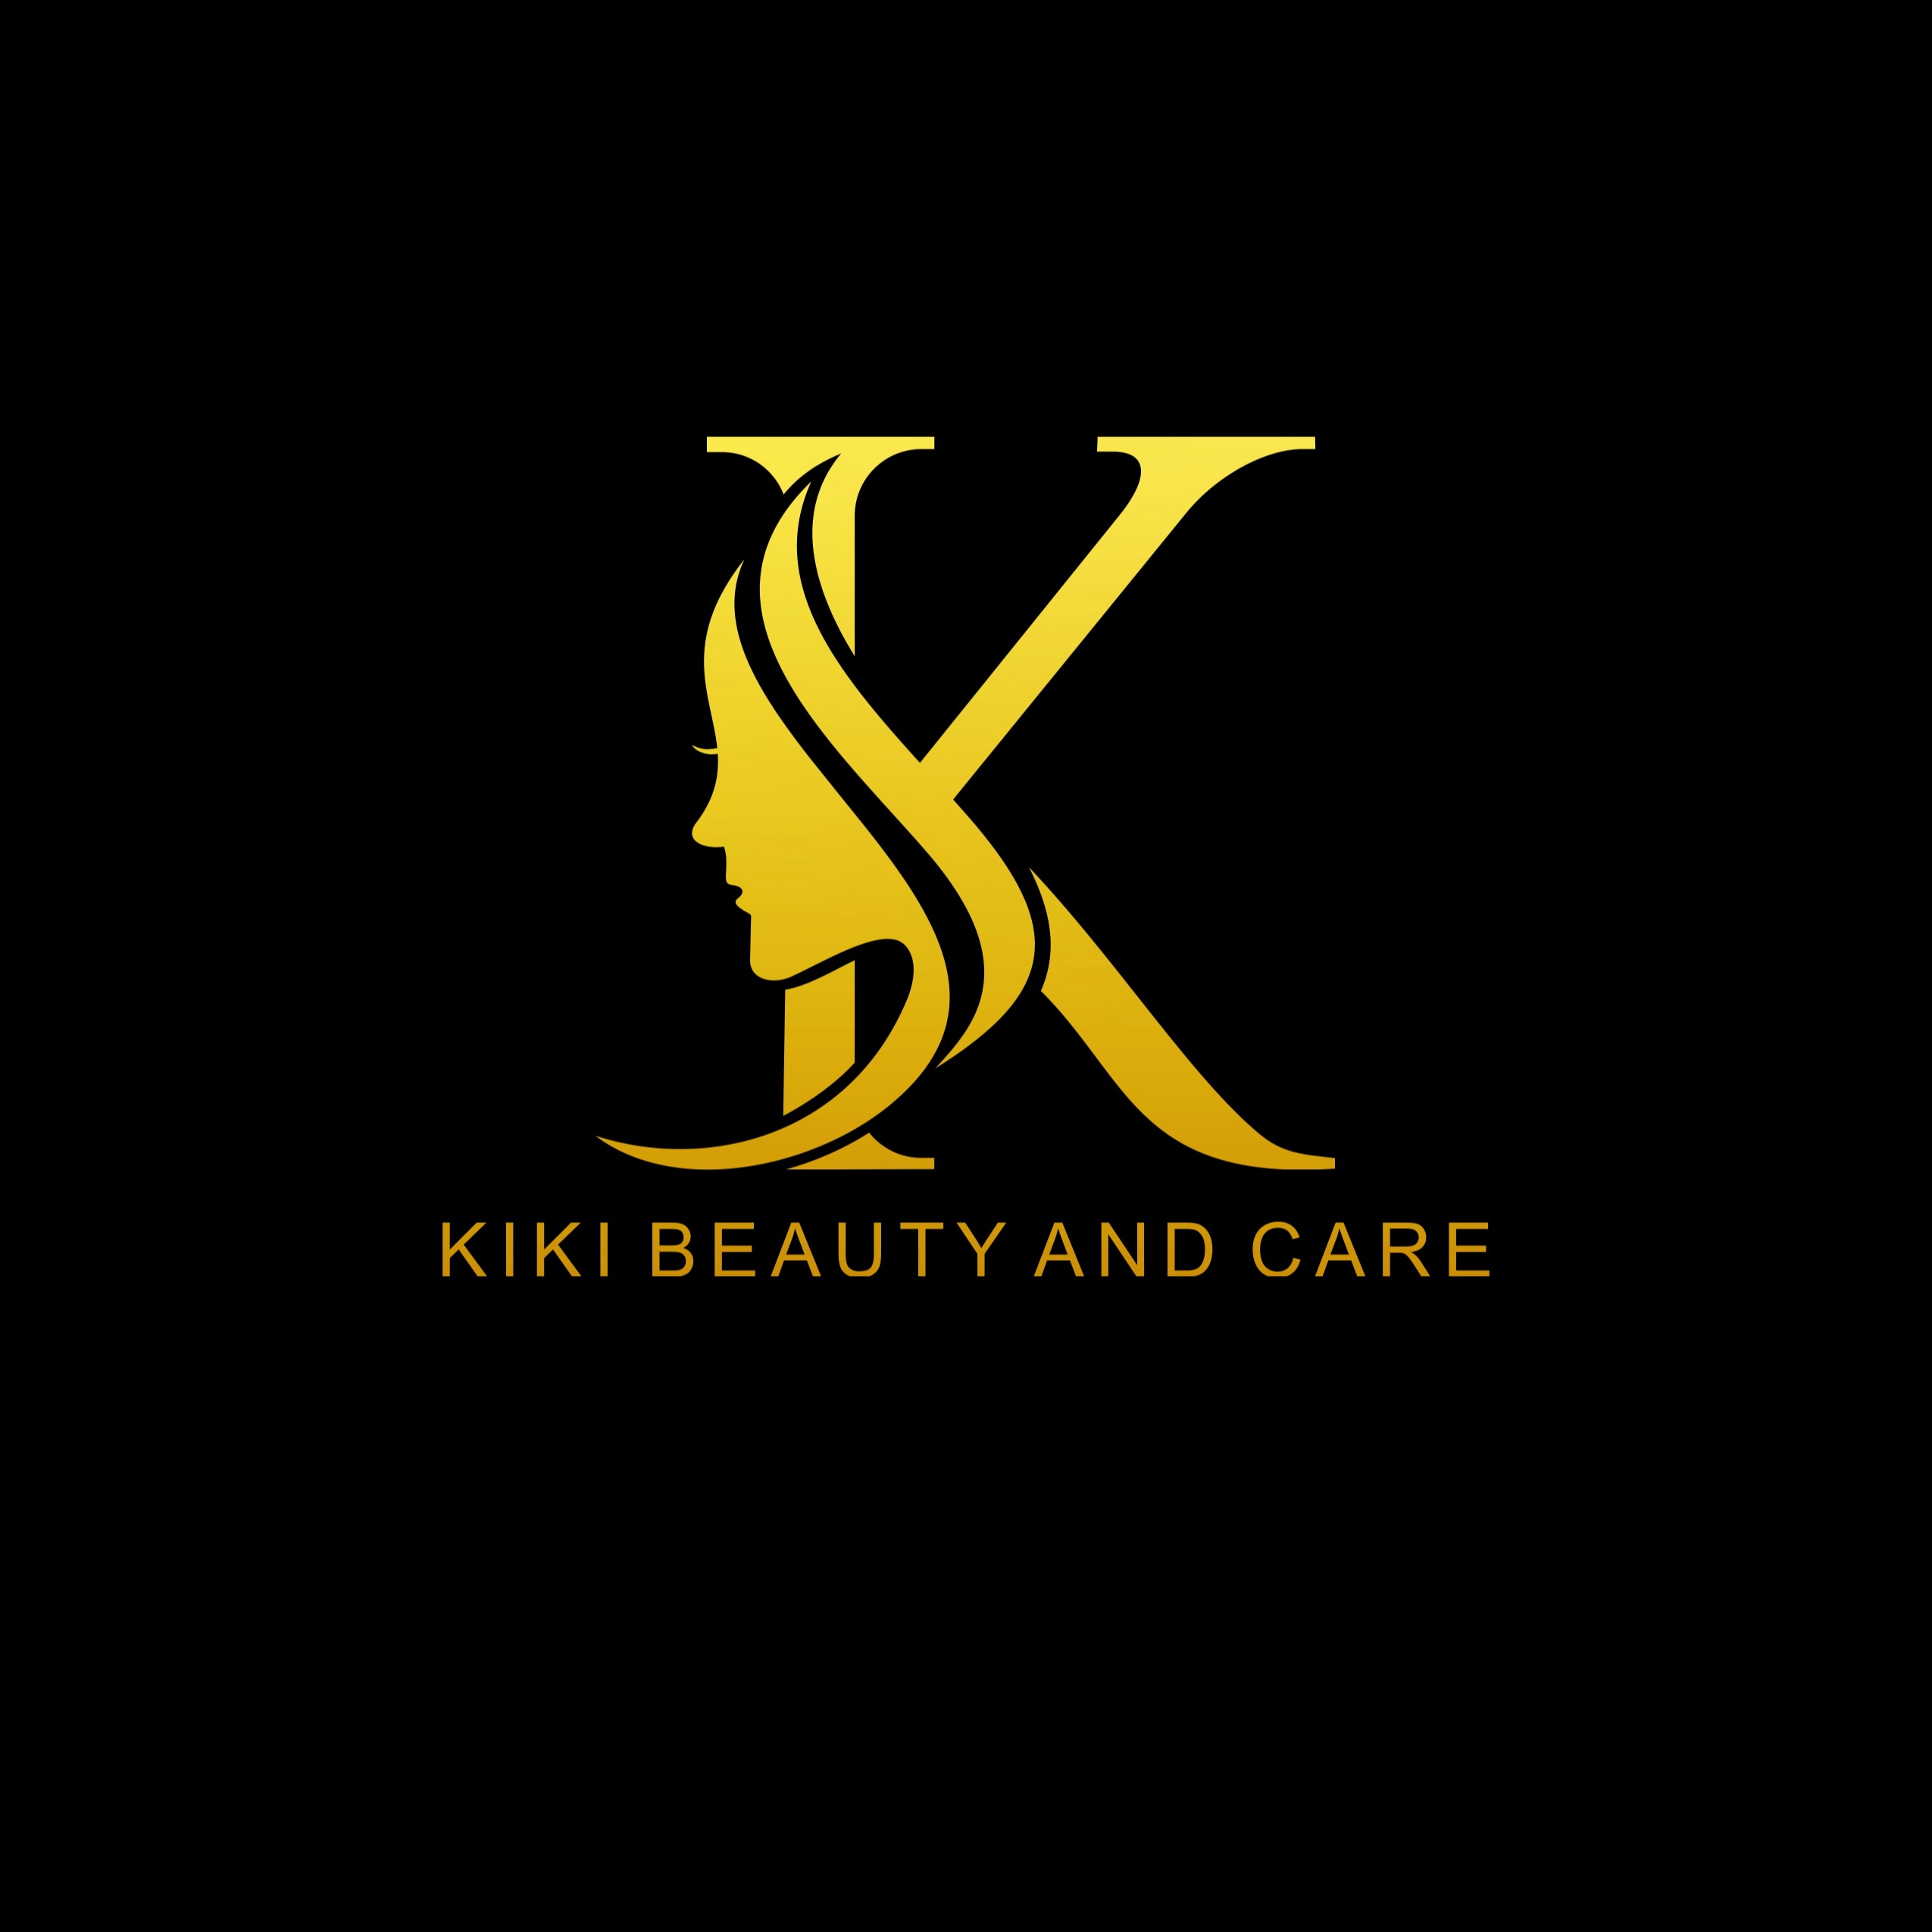 Shop at Kiki.beauty.and.care with great deals online | lazada.com.ph